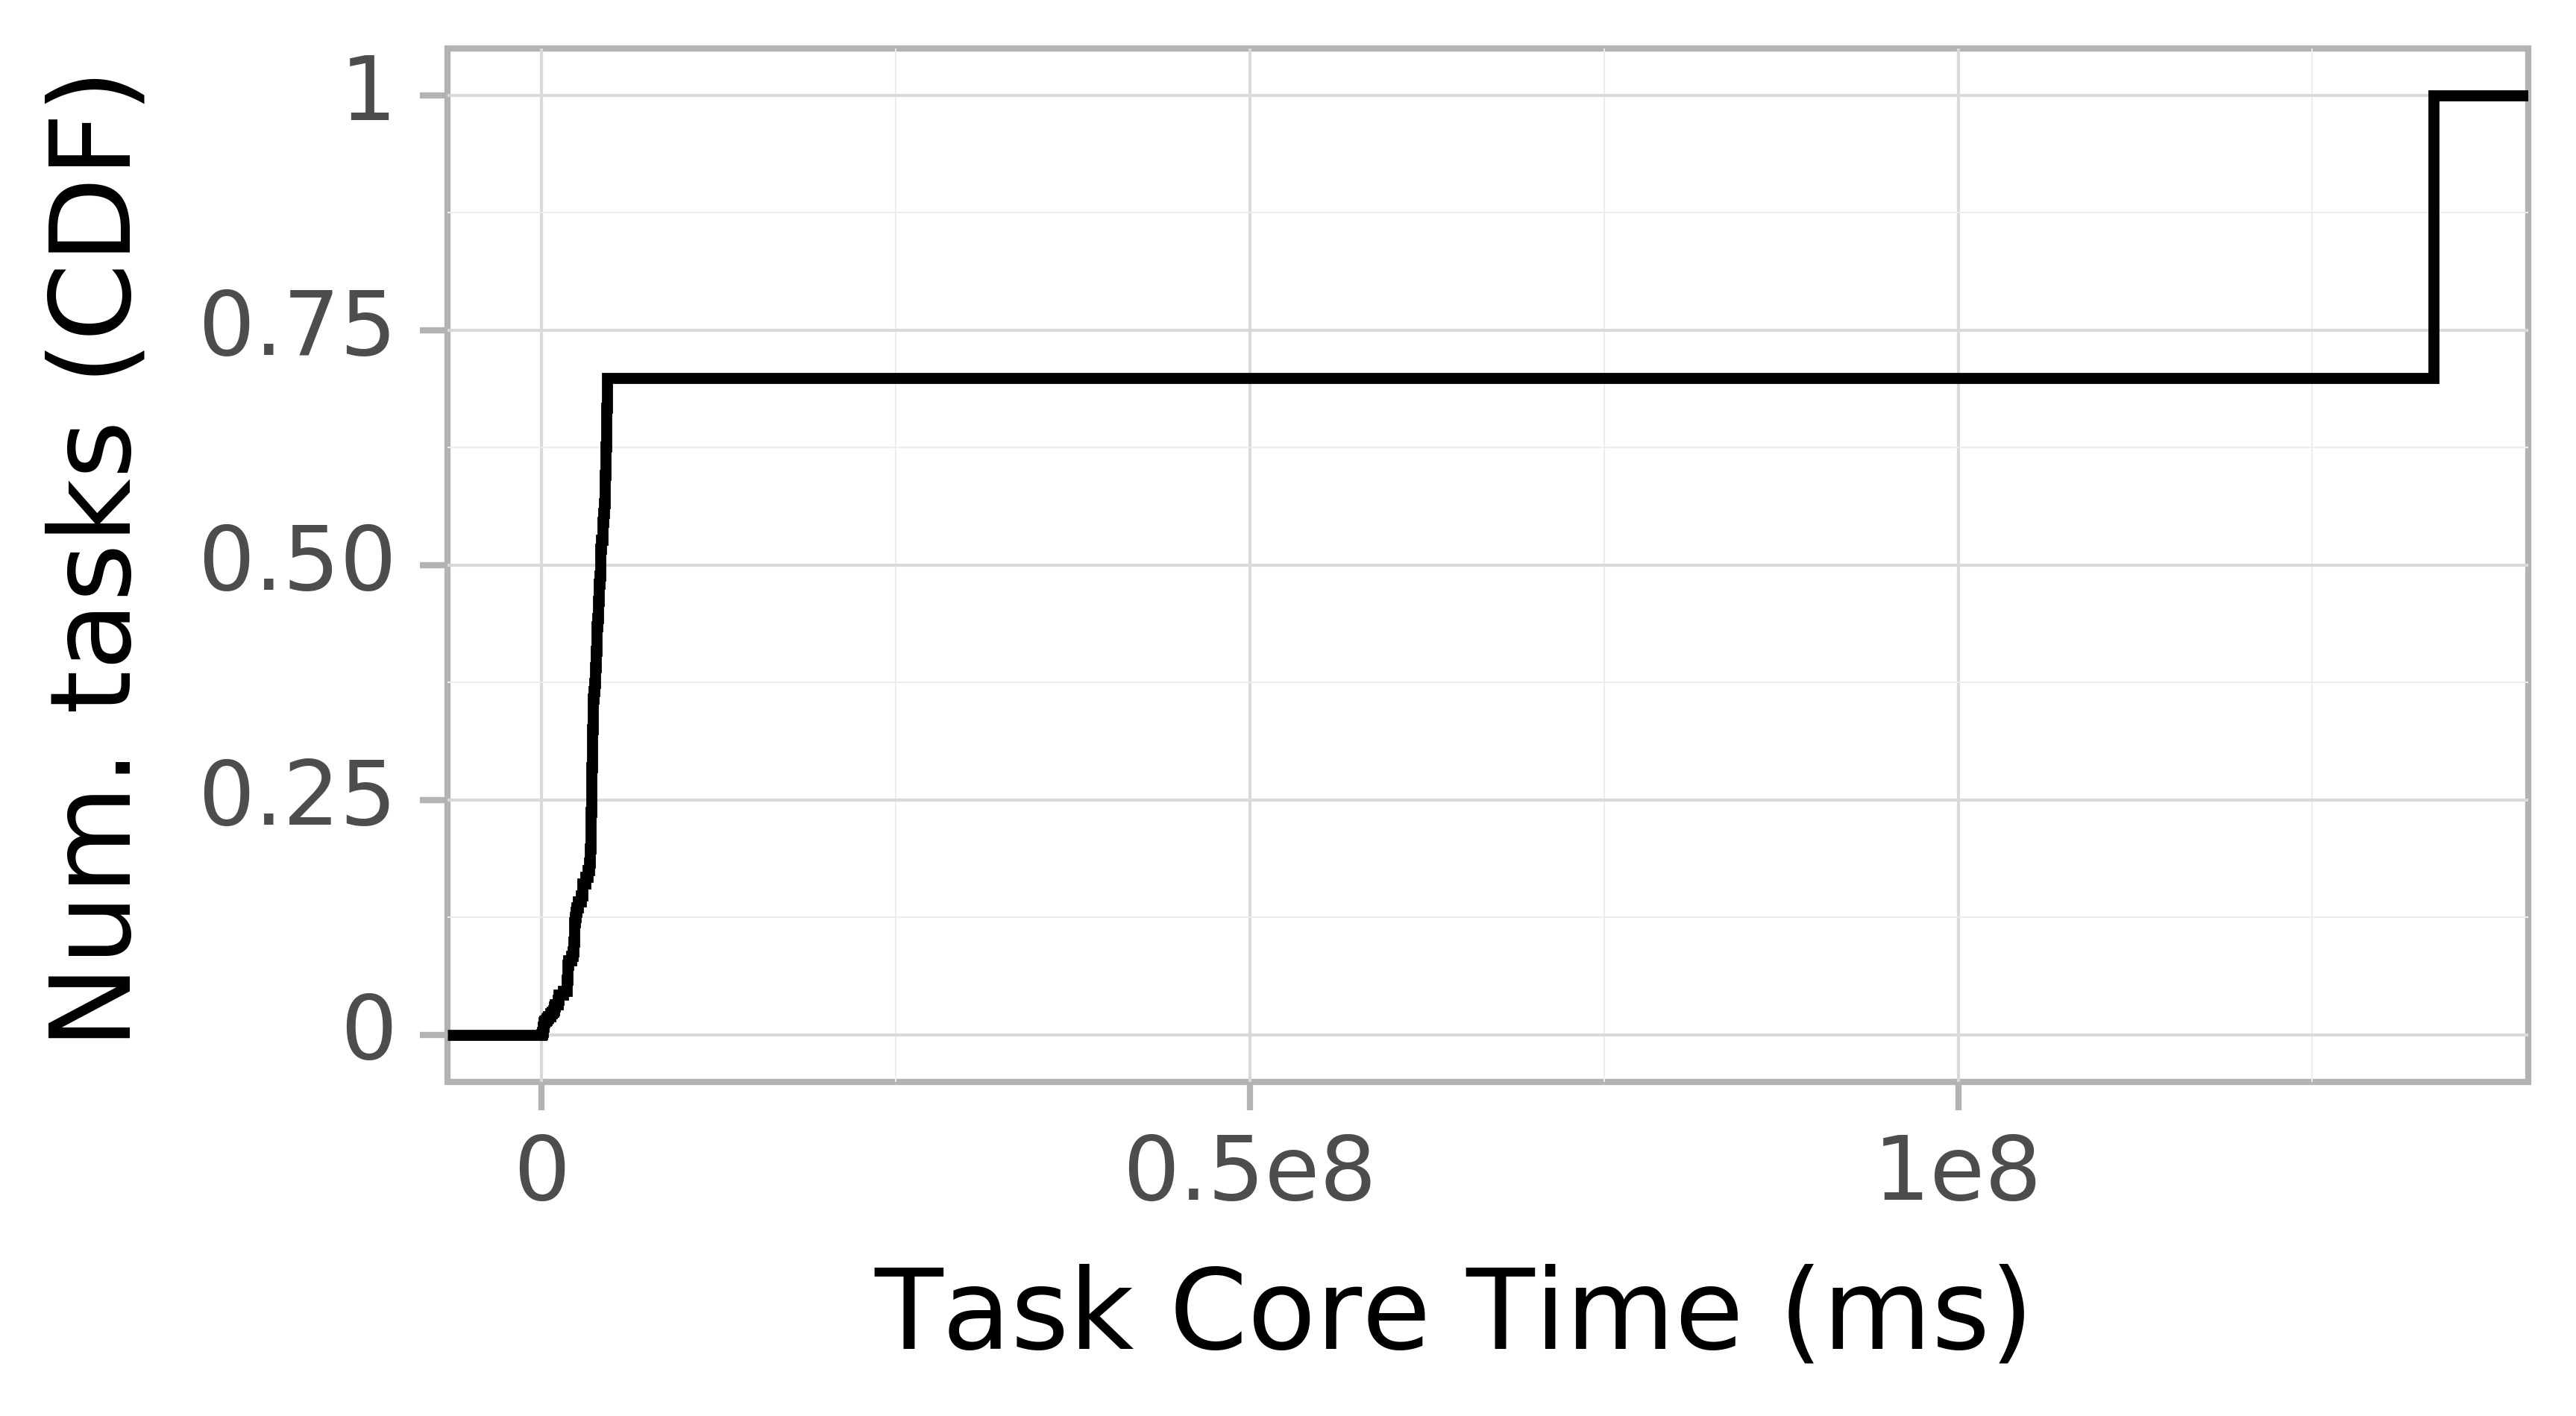 task resource time CDF graph for the Pegasus_P7 trace.